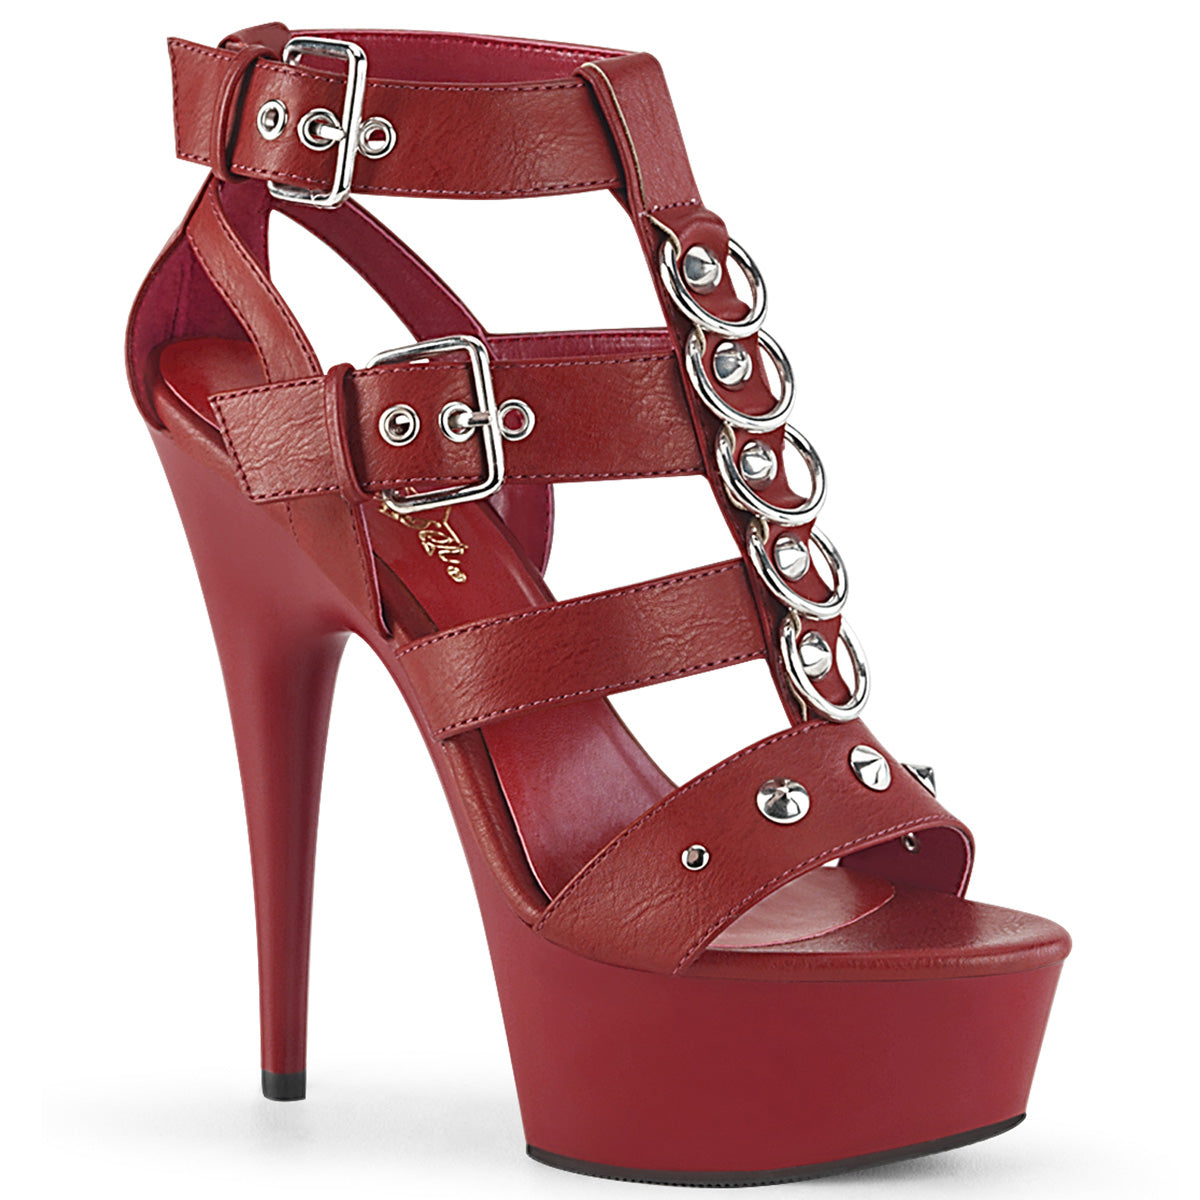 DELIGHT-658 Pleaser 6 Inch Heel Red Pole Dancing Platforms-Pleaser- Sexy Shoes